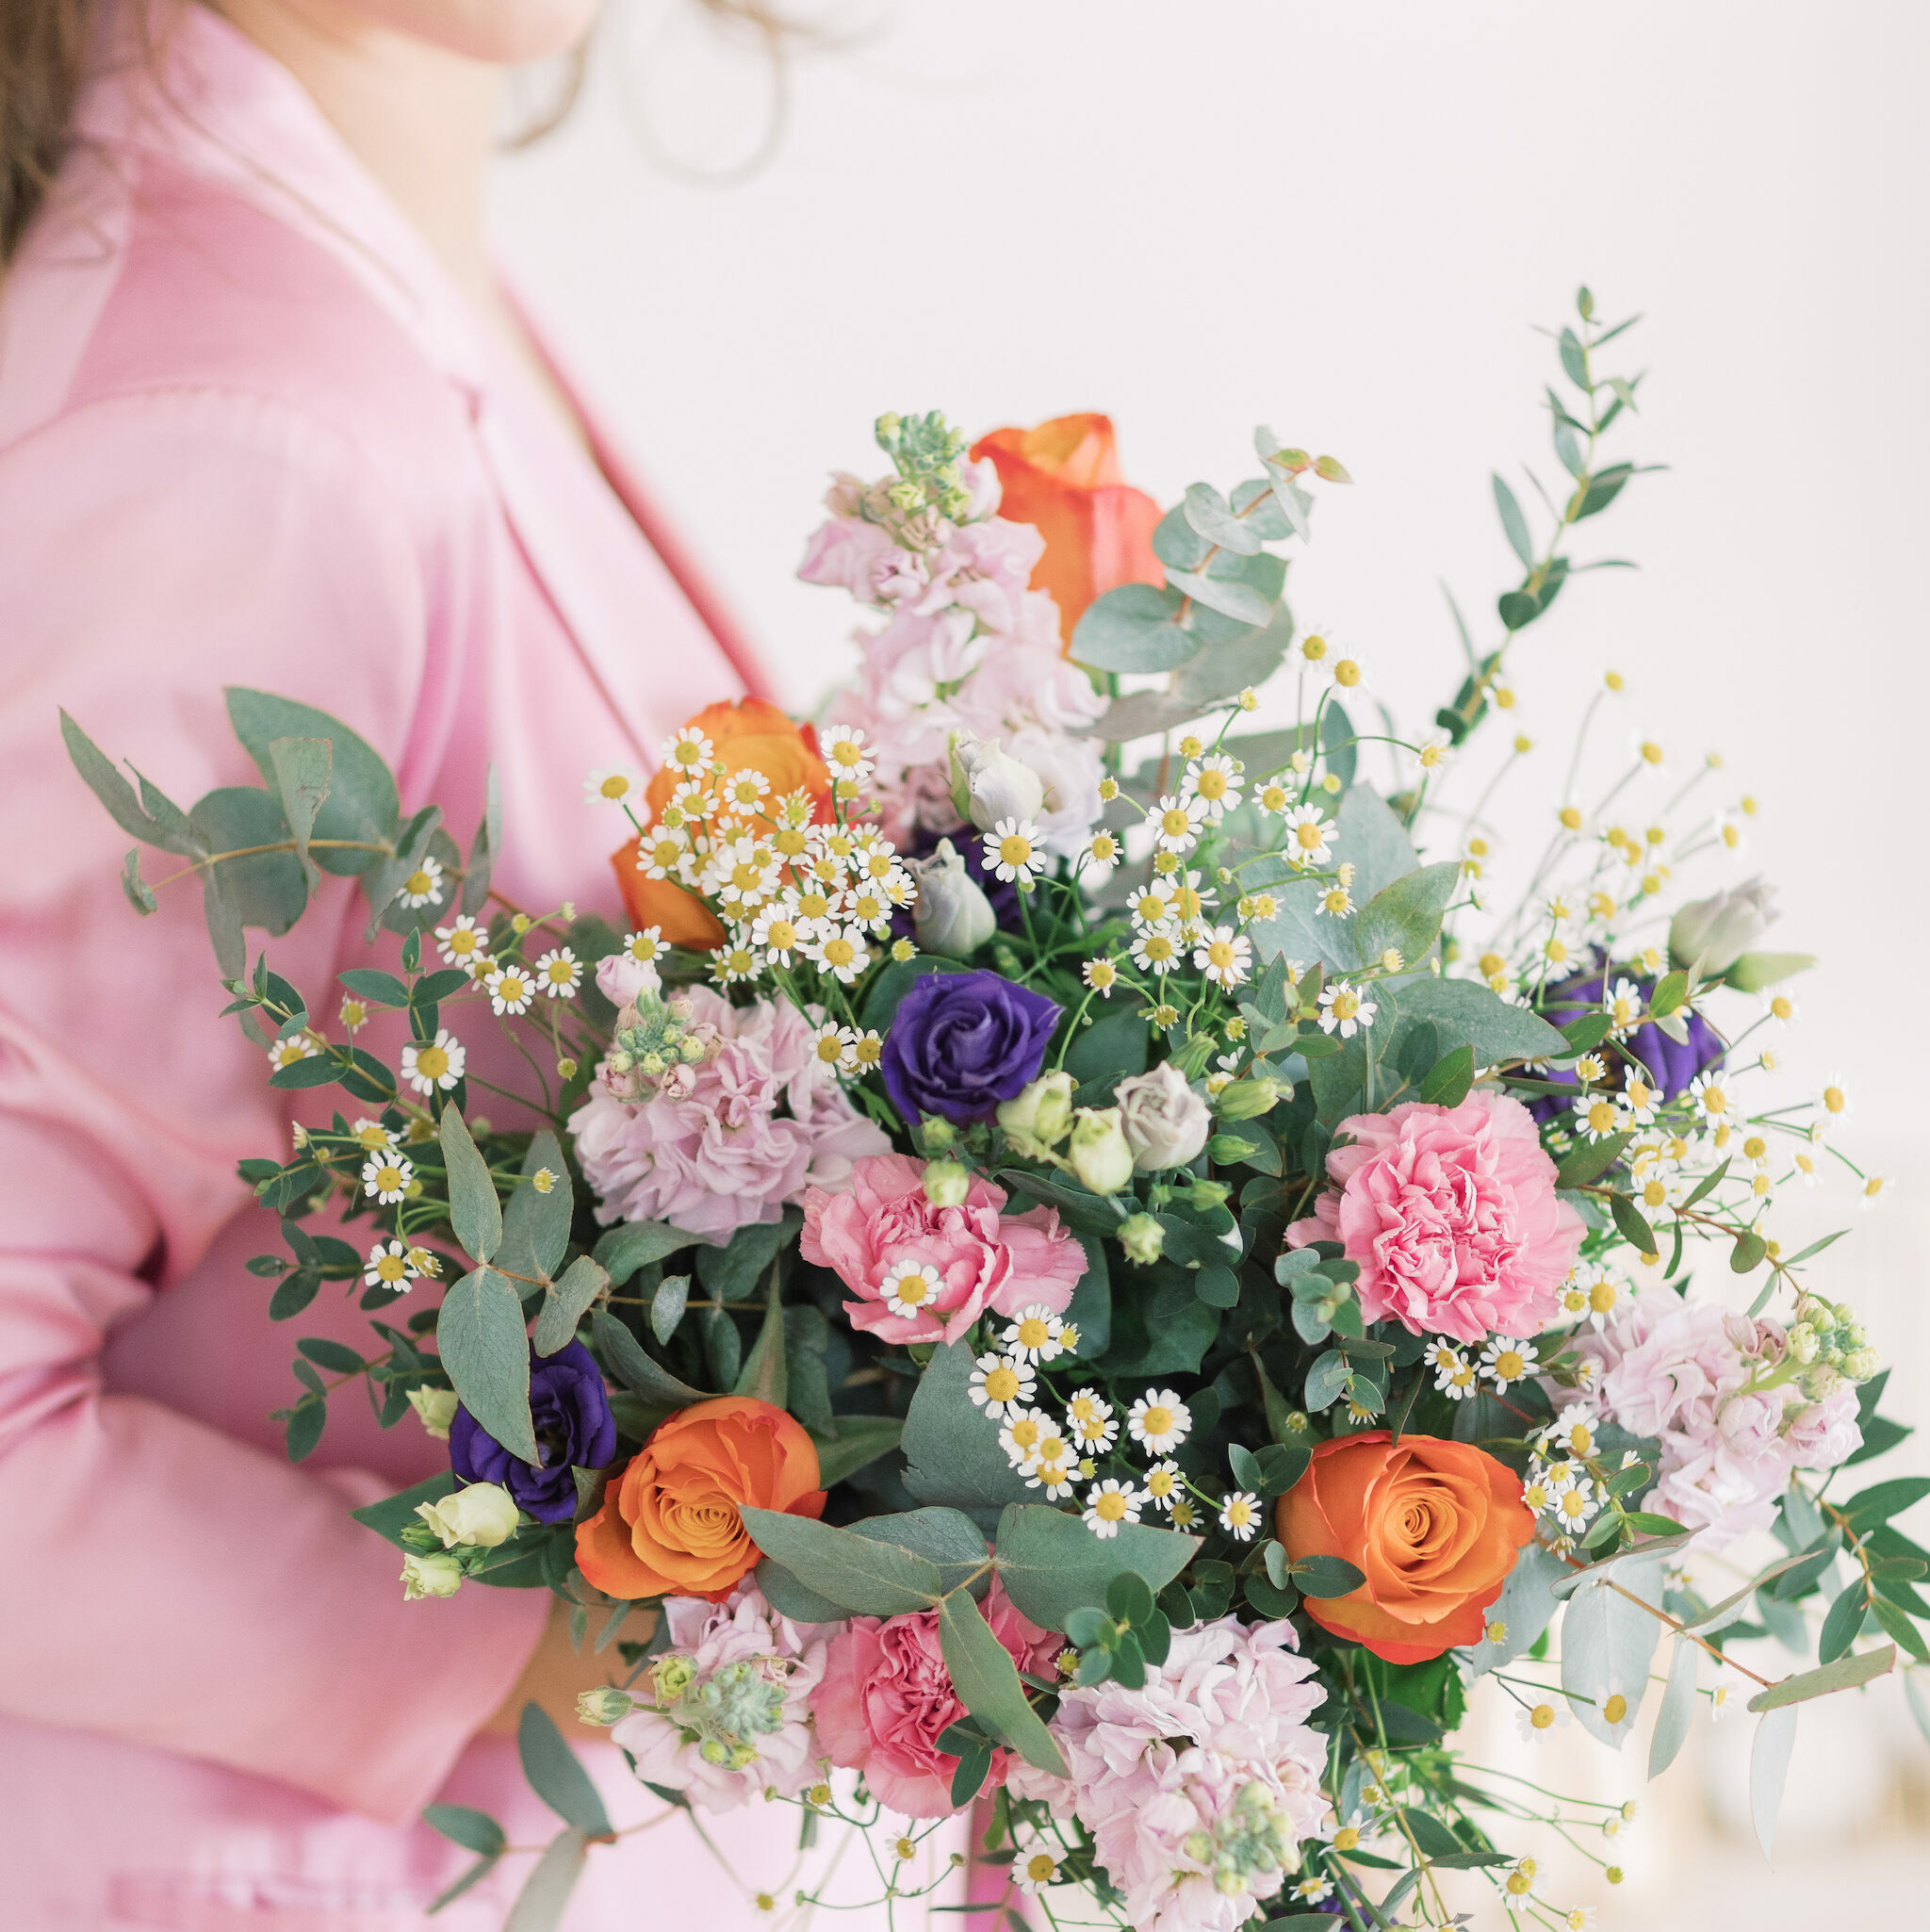 Send a bouquet to Seraing within 24 hours